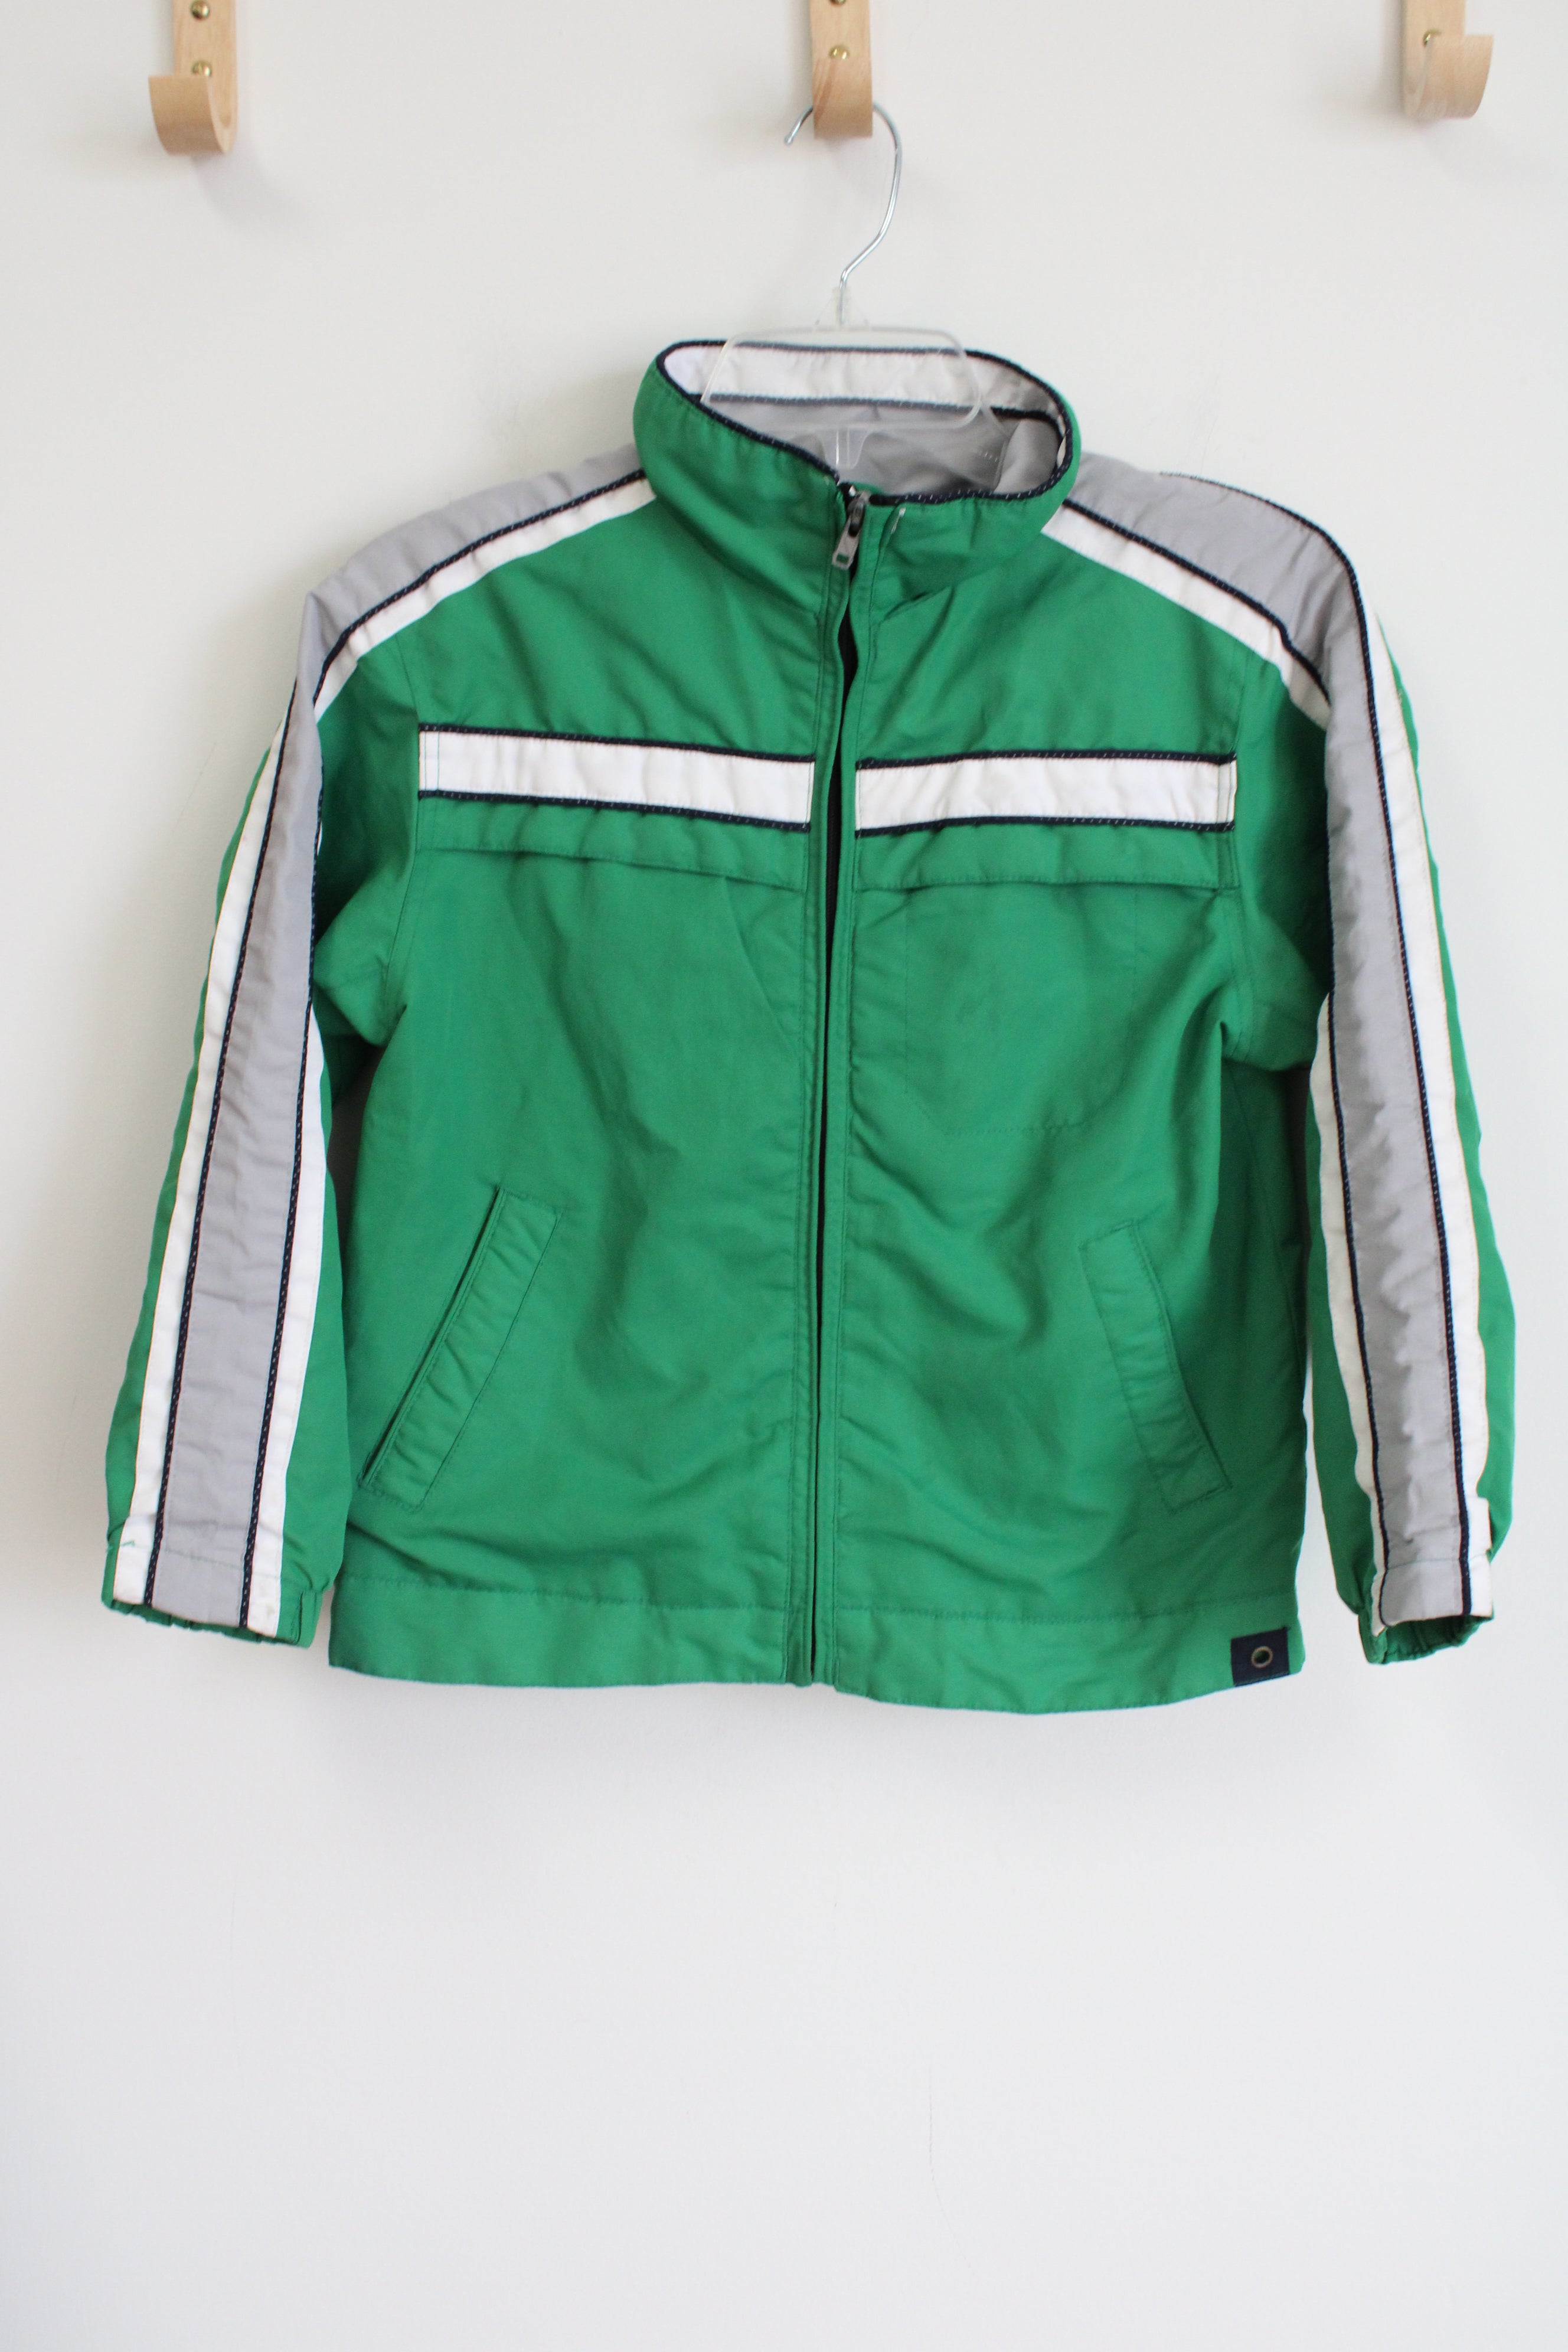 Protection System Green Zip Wind & Water Resistant Jacket | Youth XL (7)